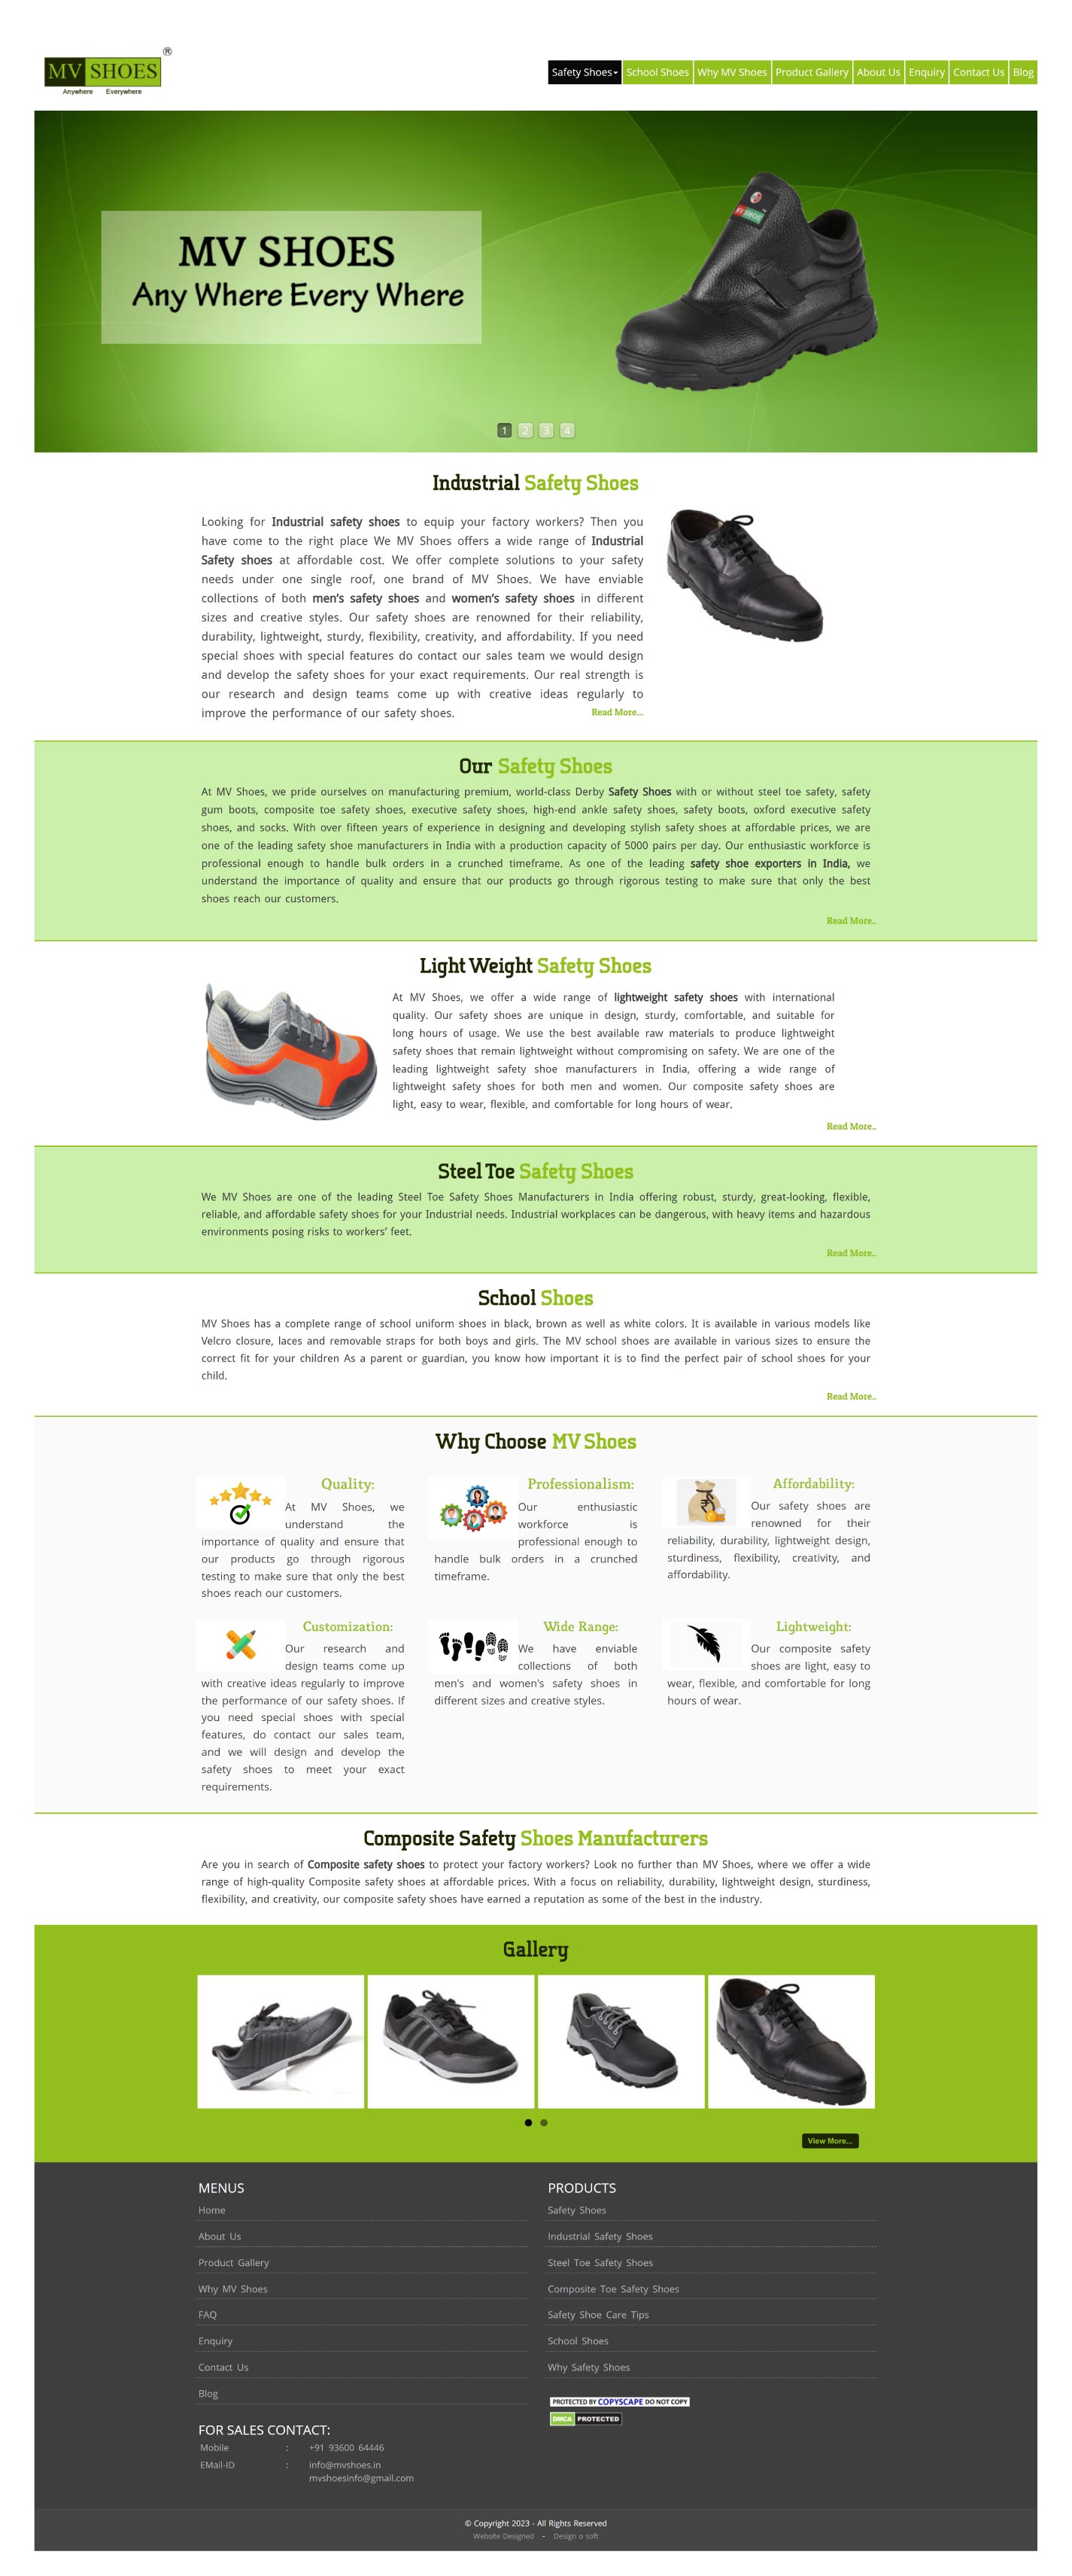 Website Designed for shoes Manufacturer in Coimbatore